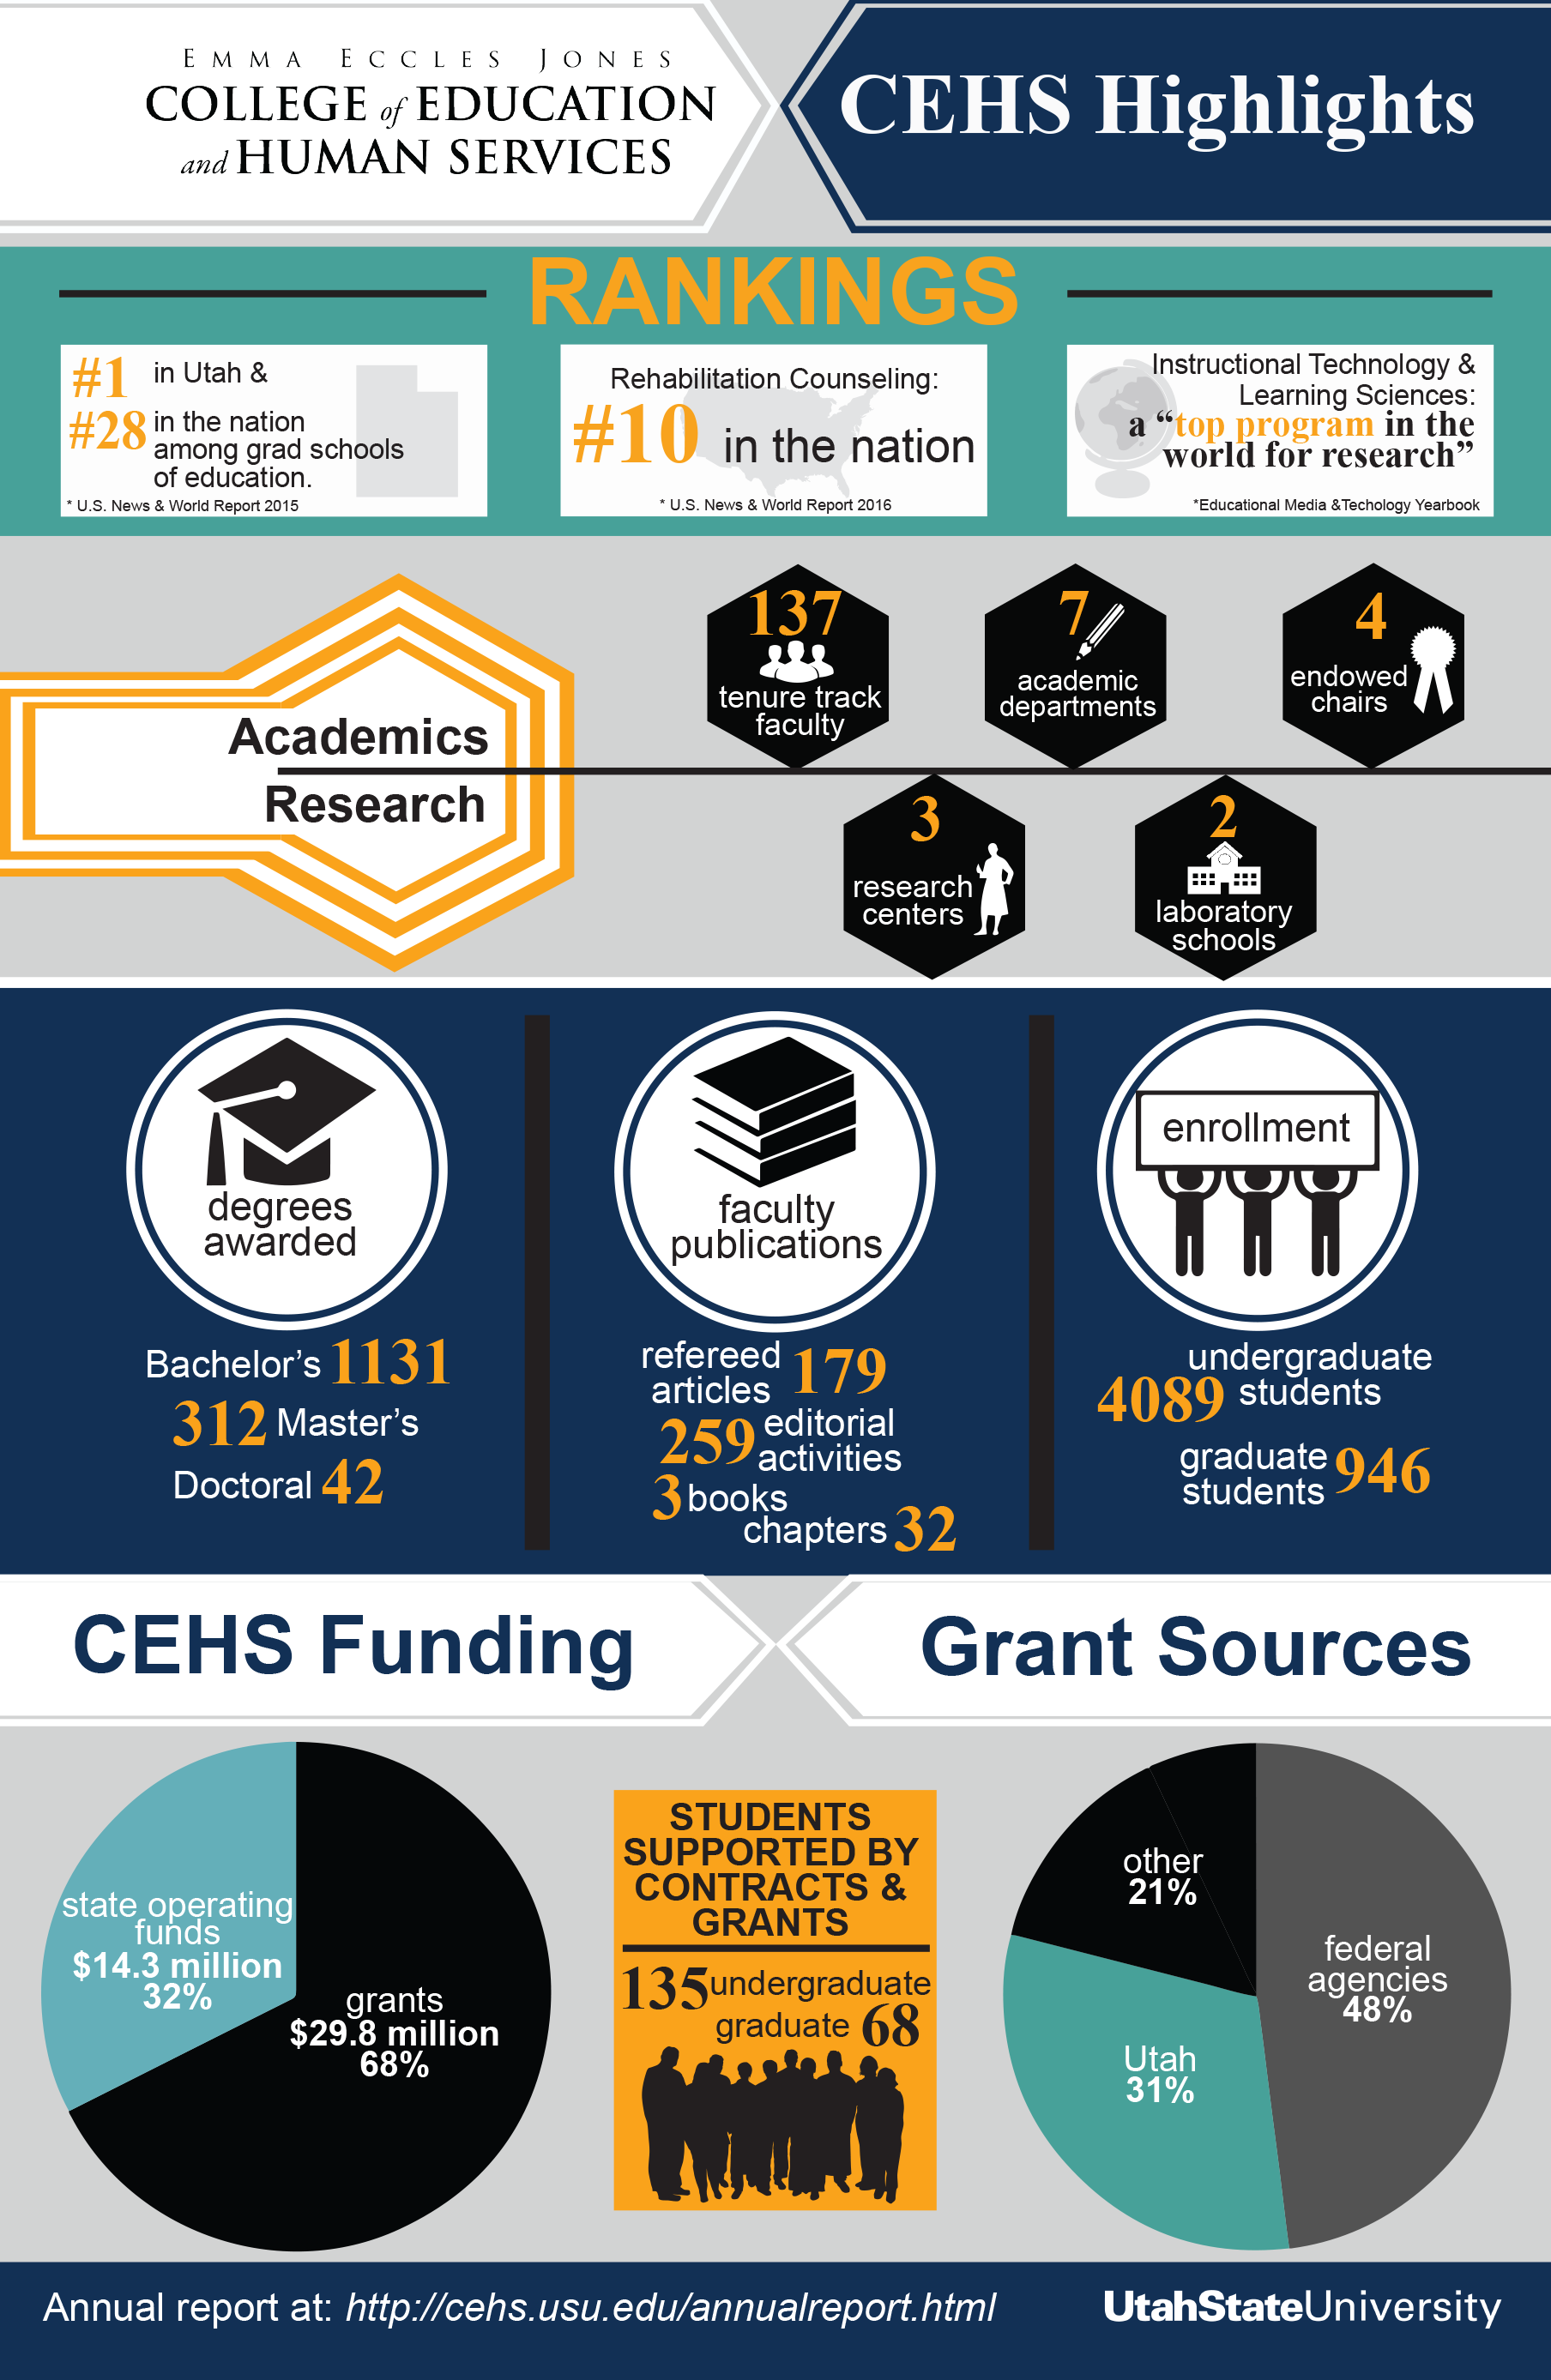 Web infrographic for EEJ CEHS